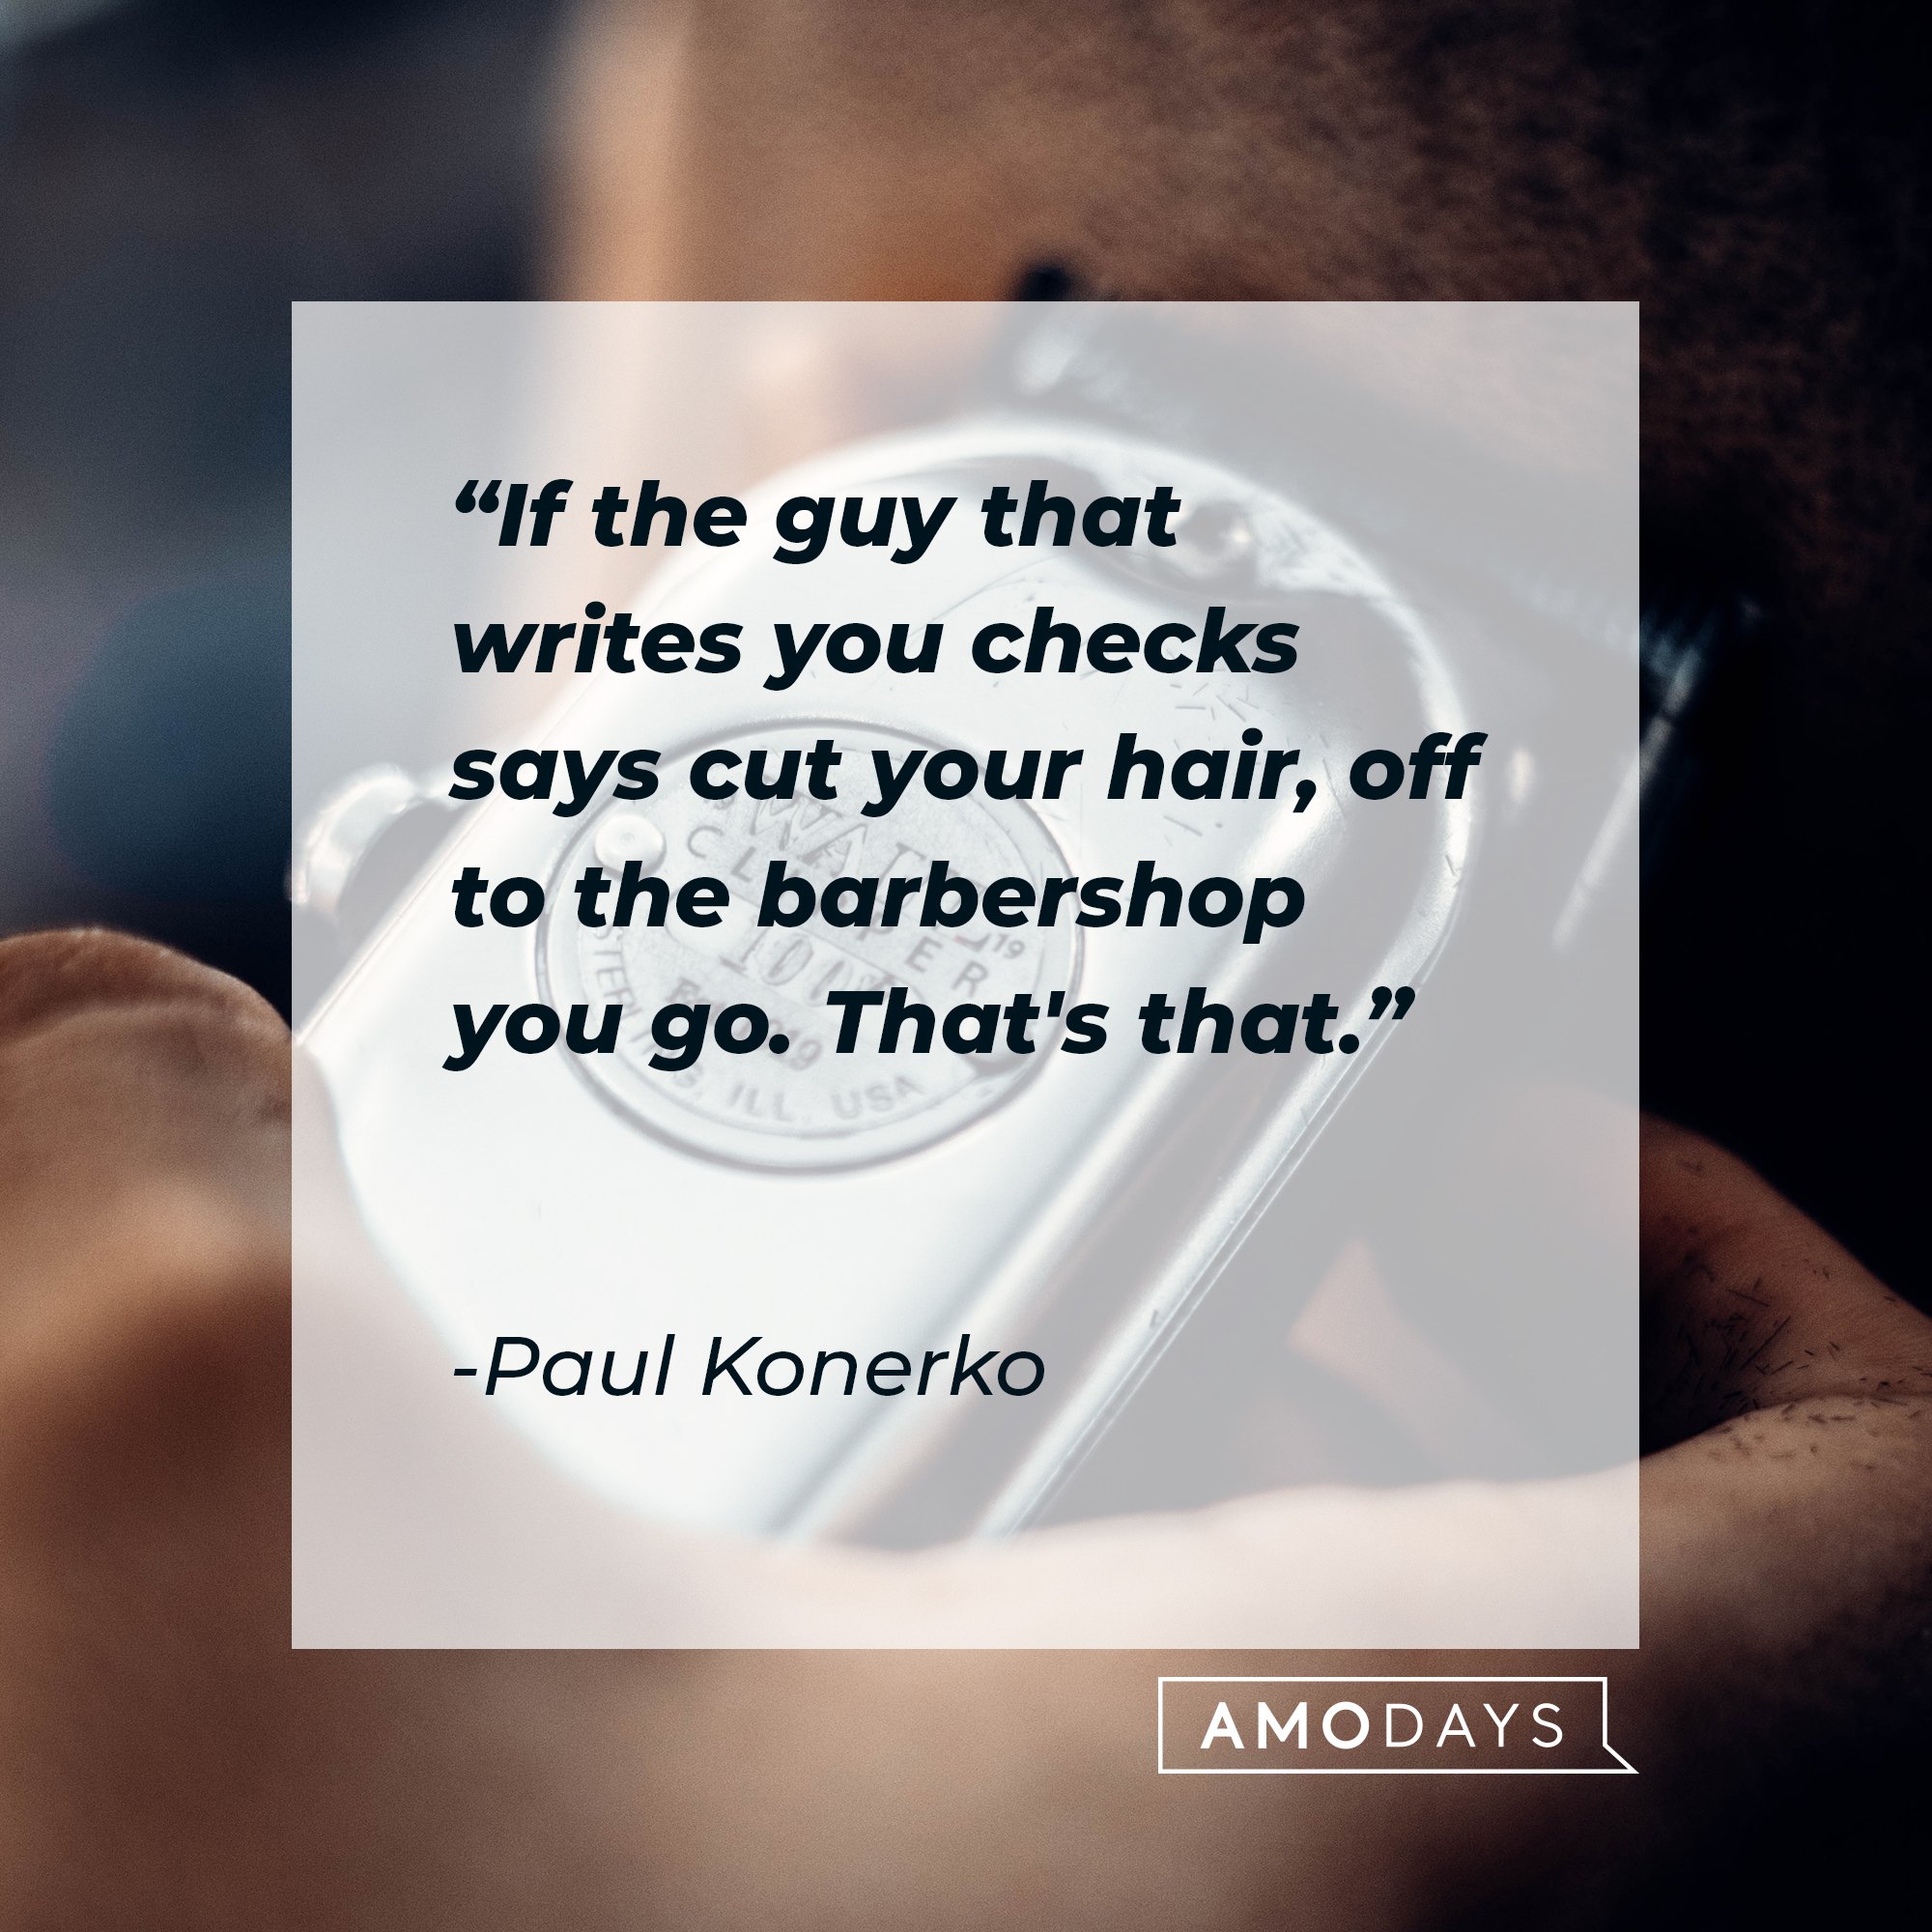 Paul Konerko's quote: "If the guy that writes you checks says cut your hair, off to the barbershop you go. That's that." | Image: AmoDays